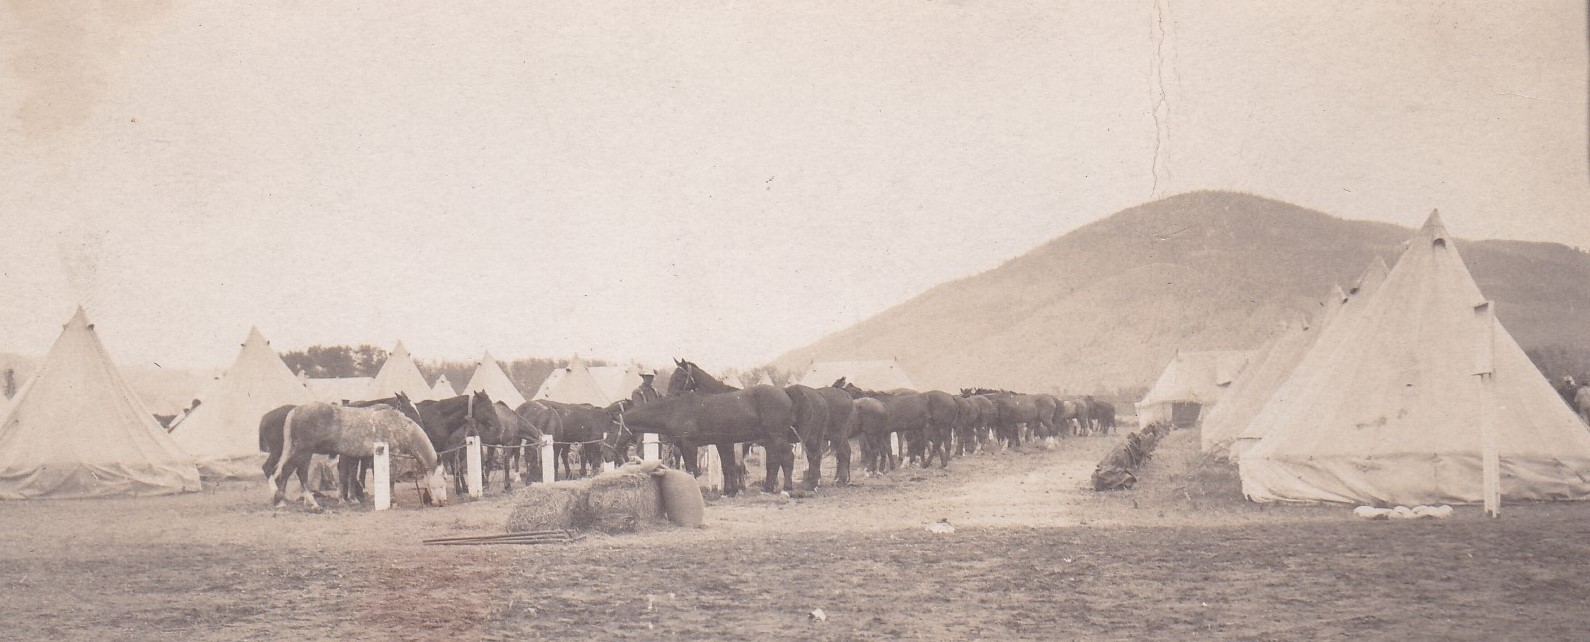 A herd of horses are in a row eating hay in an open field. The horses are tethered to a fence with rope rails. The horses are surrounded by canvas tents.